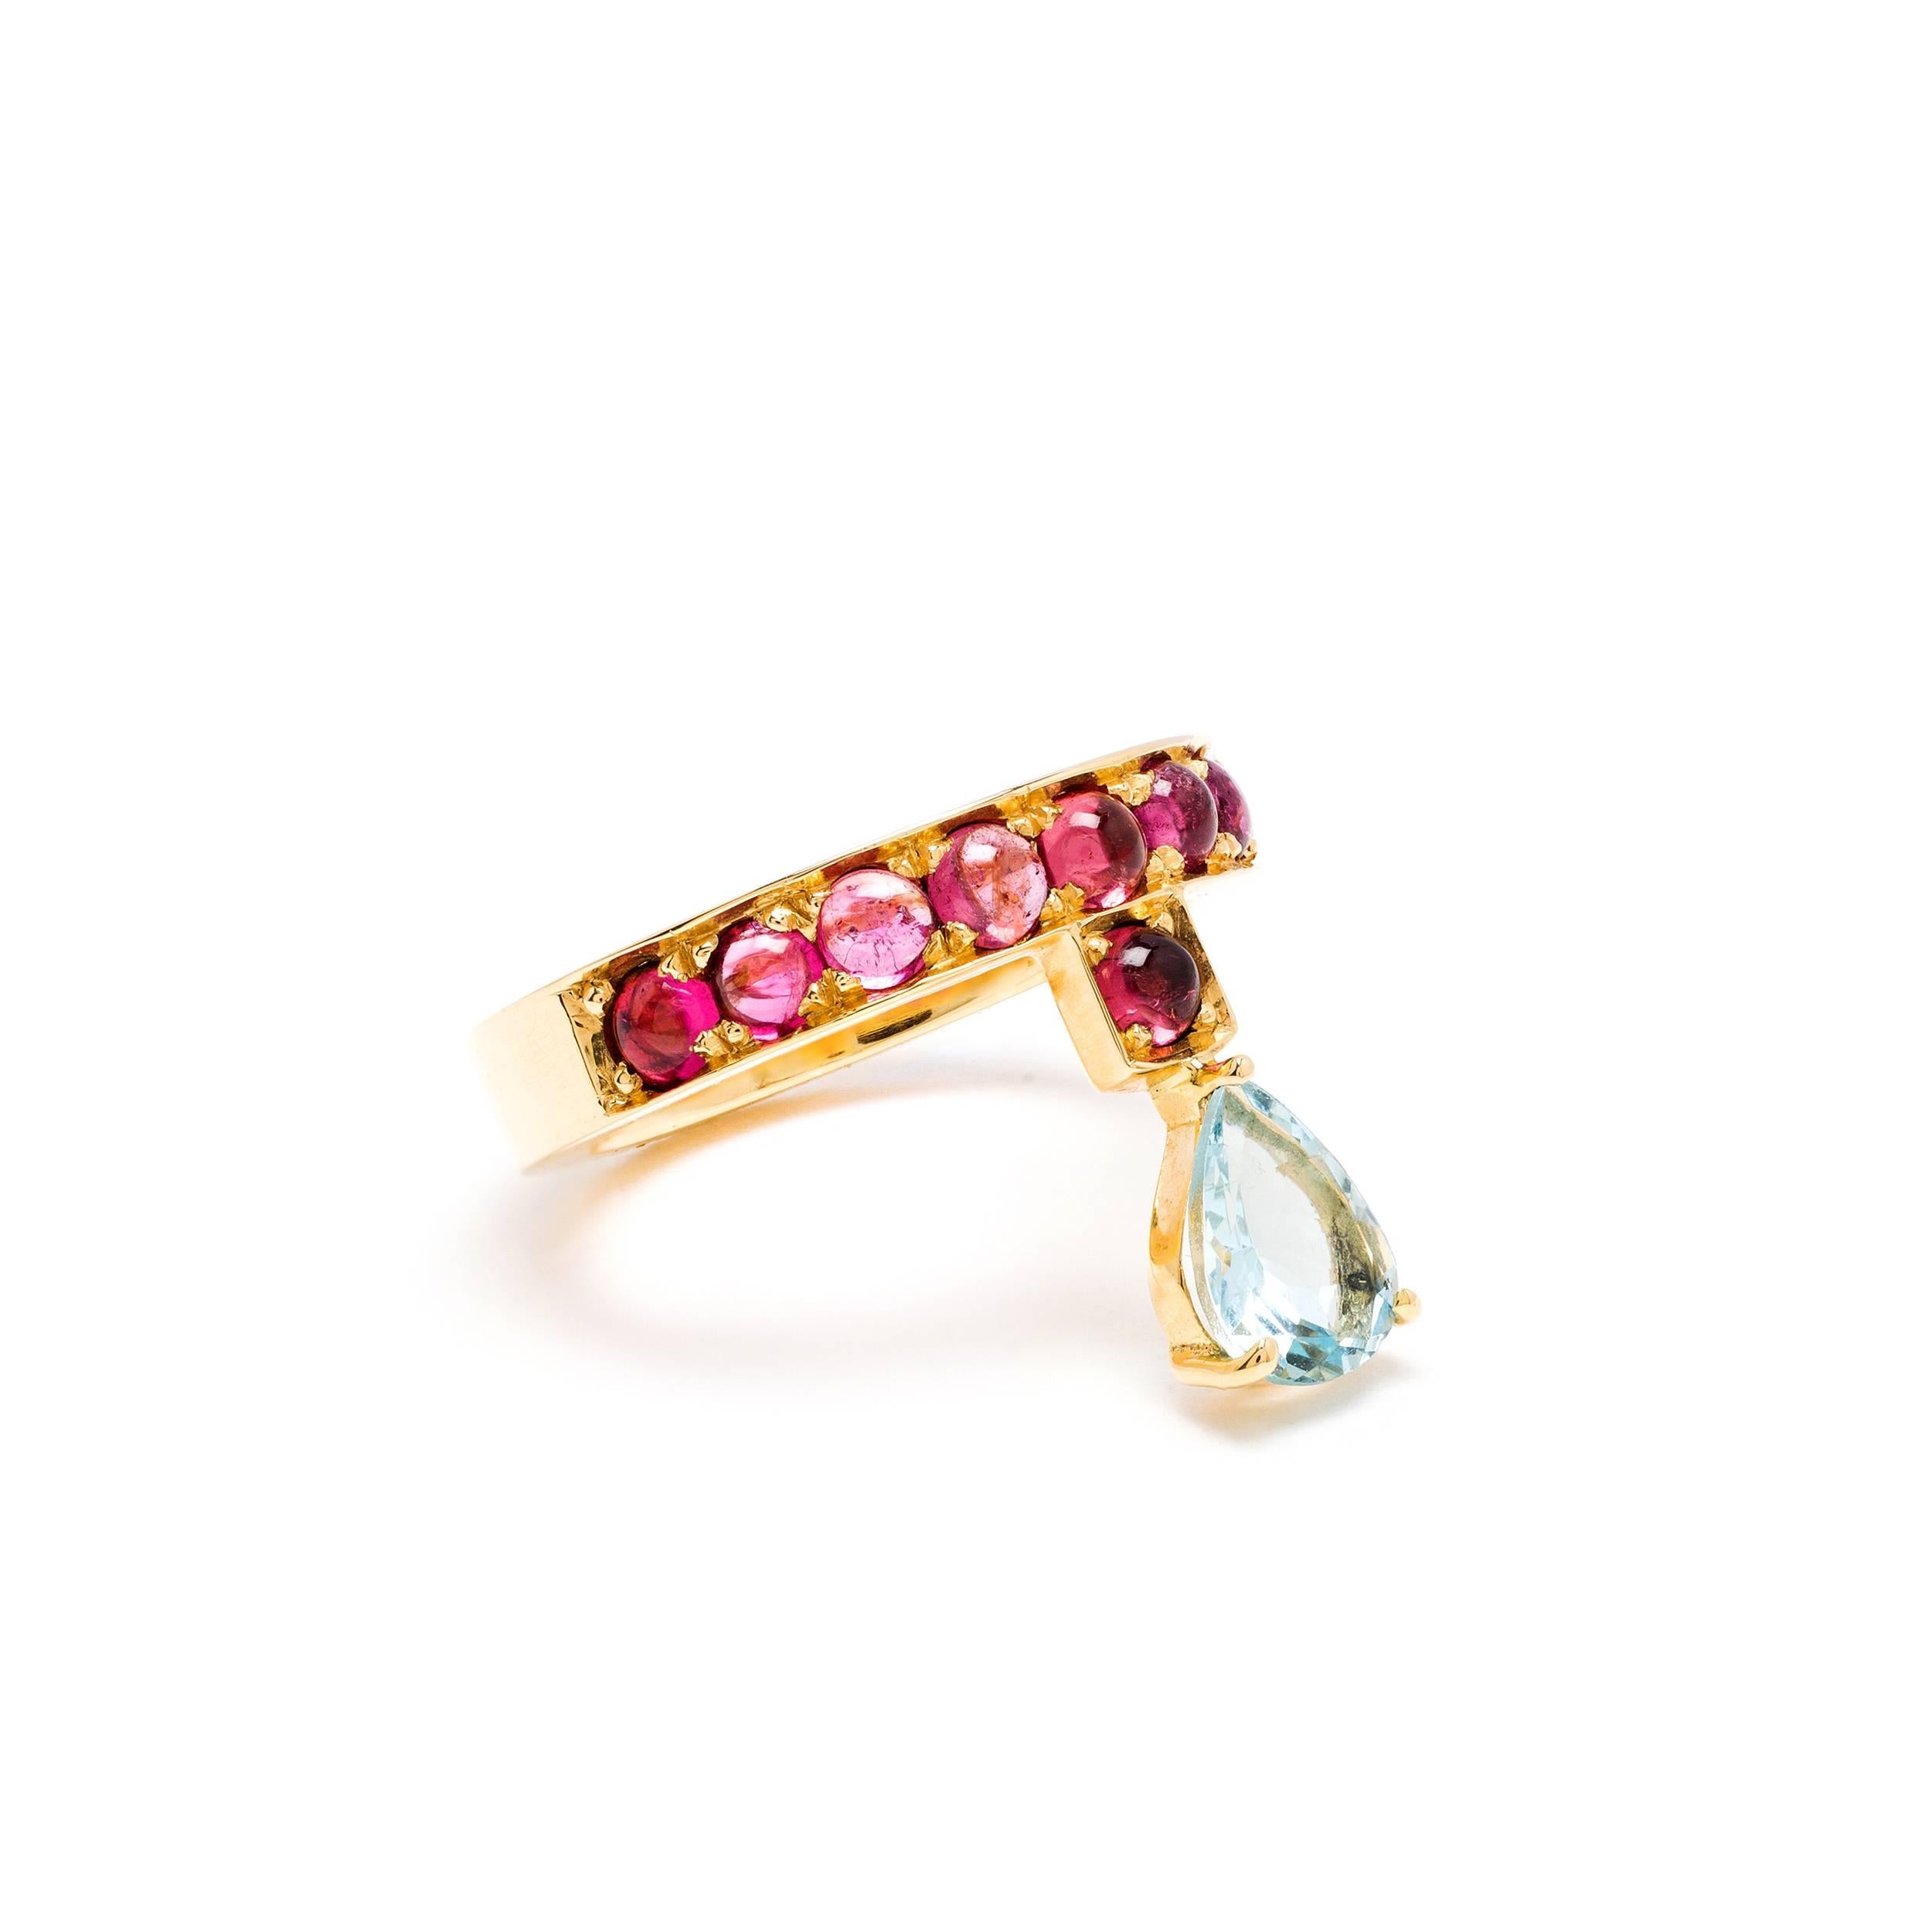 This DUBINI ring from the 'Theodora' collection features an aquamarine drop with rubellite tourmaline cabochons set in 18K yellow gold. 

Ring size available: 51 (US 5.75)

The ring may be ordered in any size with a lead time of 2-3 weeks.

Please